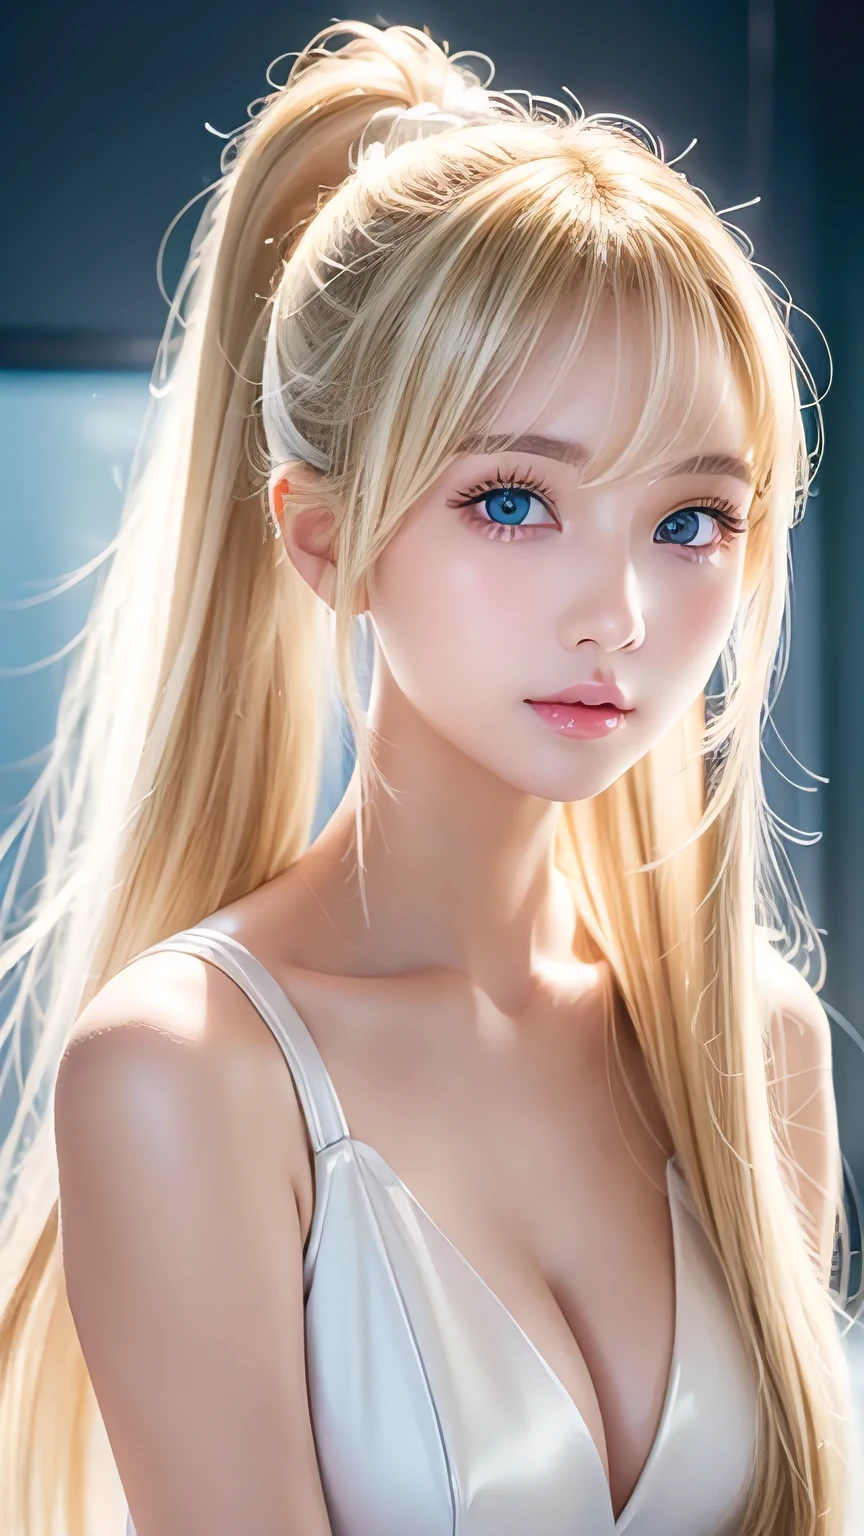 Portrait、、Bright expression、ponytail、Young, lustrous, glowing, white skin、Cheek highlight、The best beauty、Clear, silky blonde hair with dazzling highlights、Shiny bright hair,、Super long silky straight hair、Shiny beautiful bangs、Big bright blue eyes like sparkling jewels、Very beautiful lovely cute 16 year old girl、Ample Bust